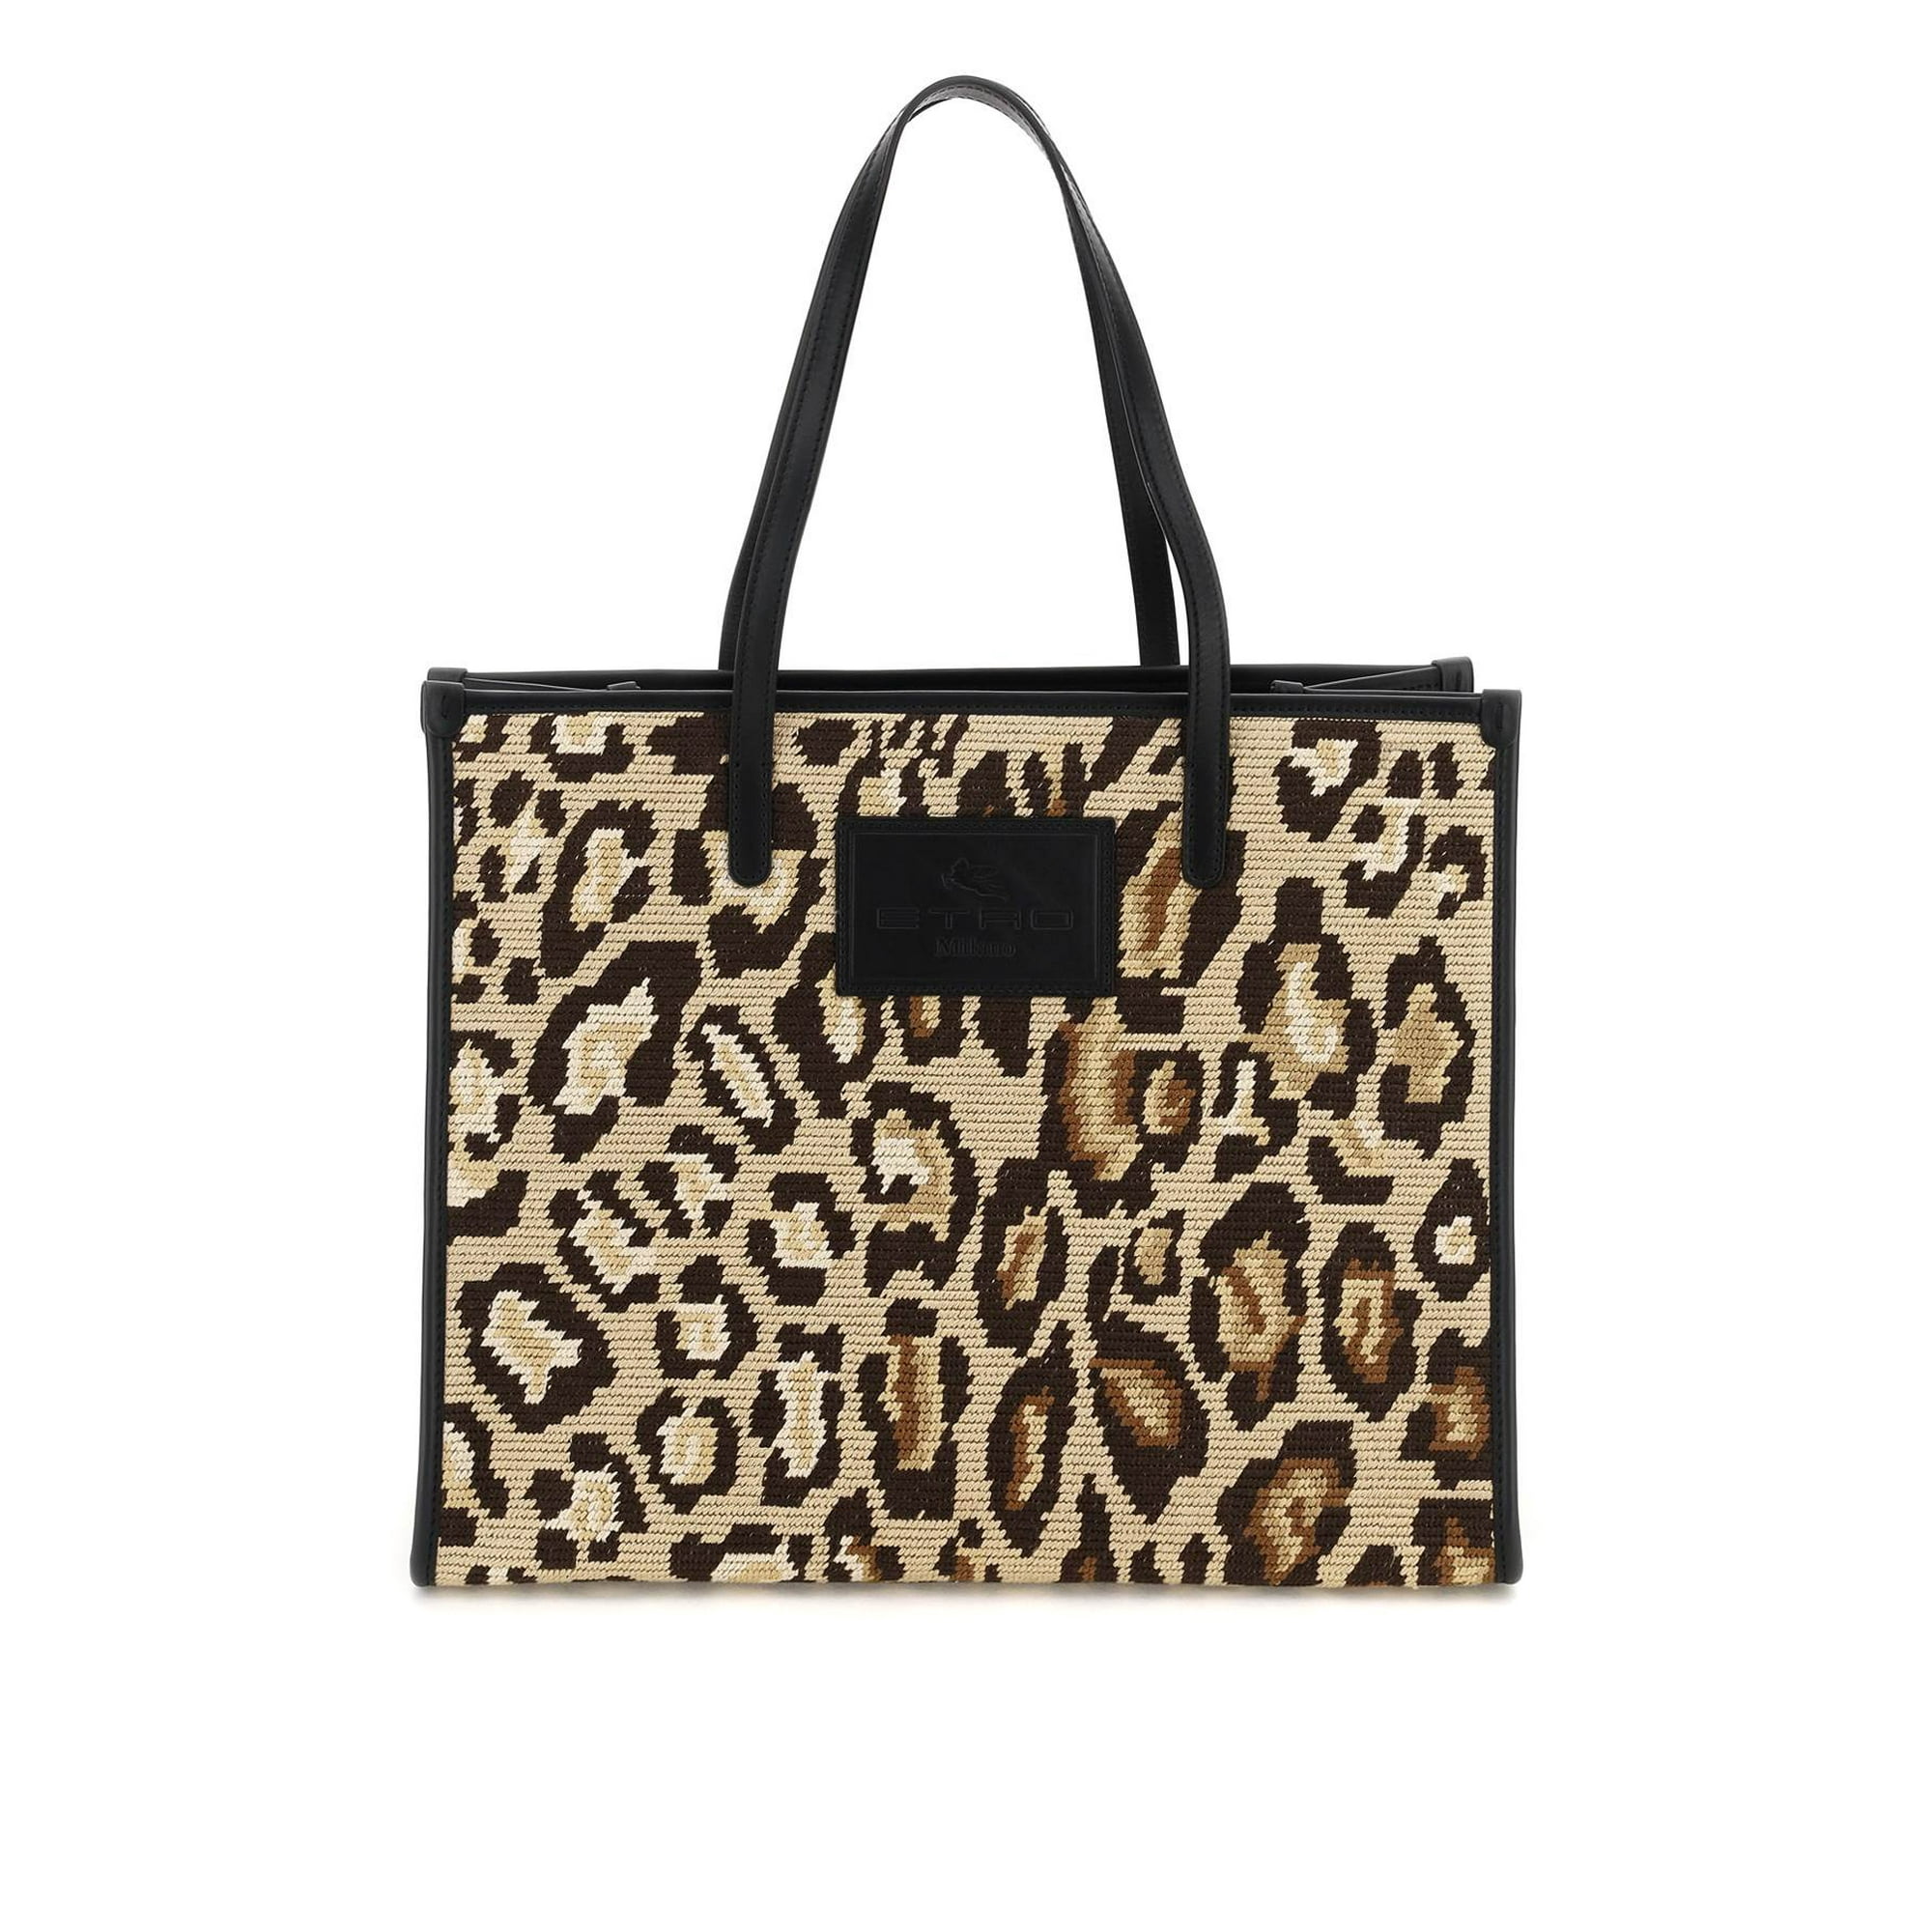 embroidered leather tote bag, ETRO